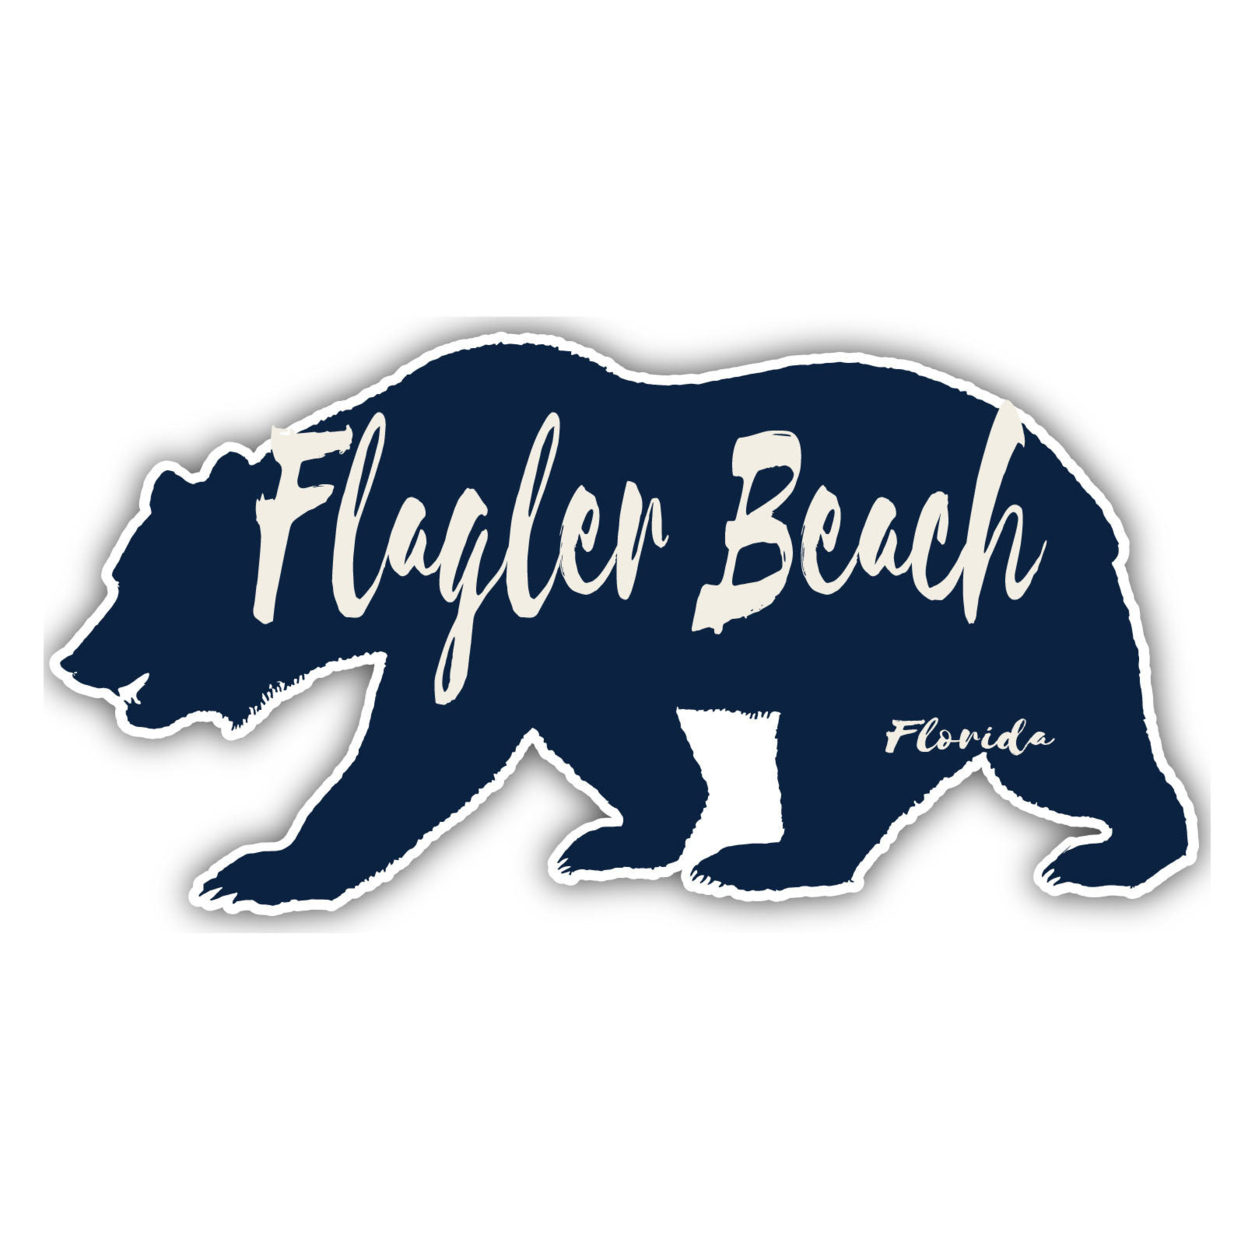 Flagler Beach Florida Souvenir Decorative Stickers (Choose Theme And Size) - 4-Pack, 6-Inch, Camp Life